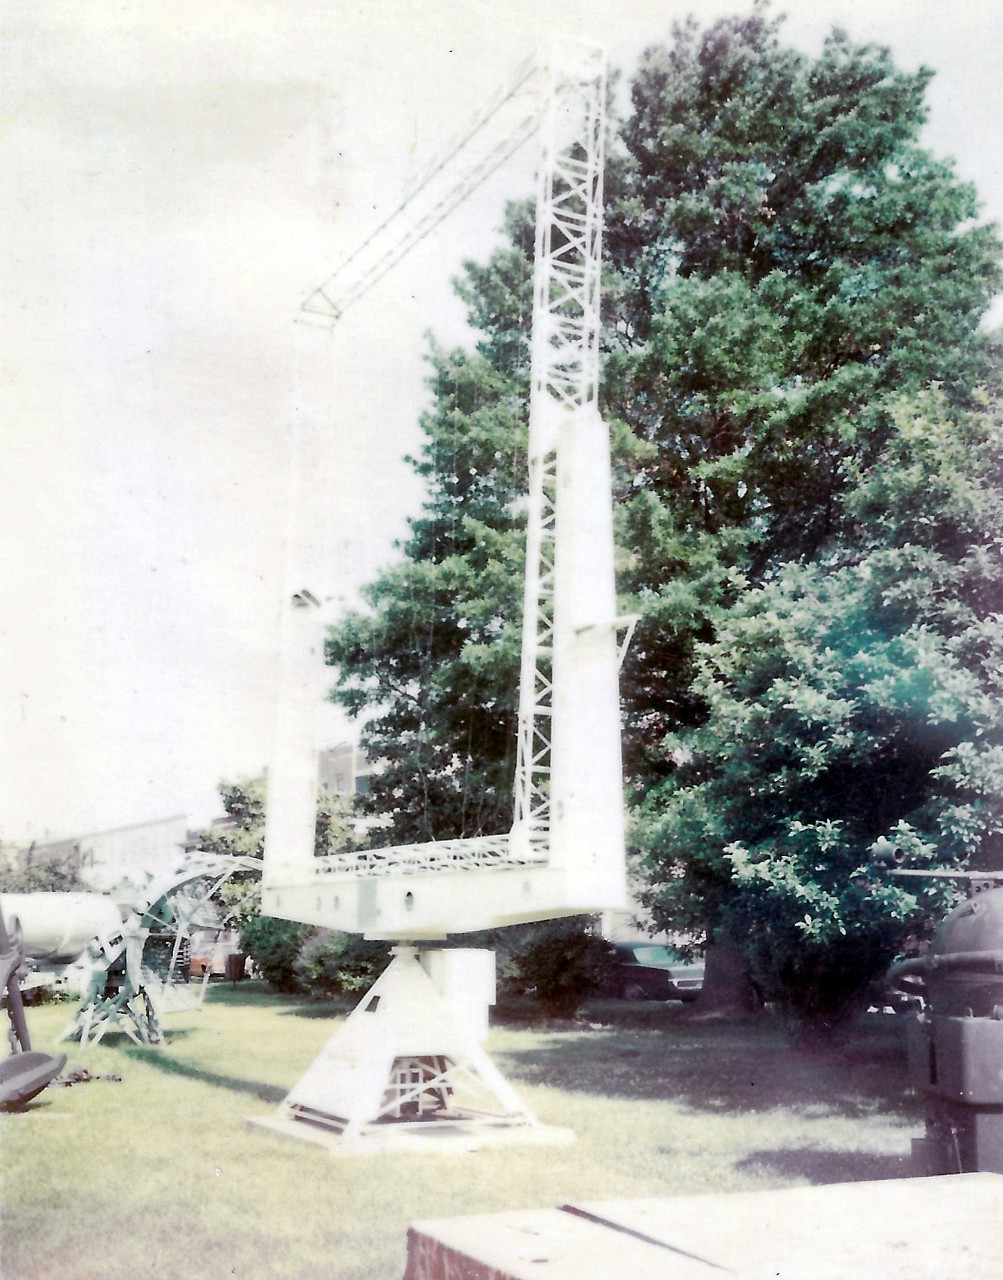 NMUSN-606:  Willard Park, 1970s.   USS New York (BB-34), first shipboard radar antenna, type XAF, 1939.   Original is from a faded Polaroid.   National Museum of the U.S. Navy Photograph Collection.  